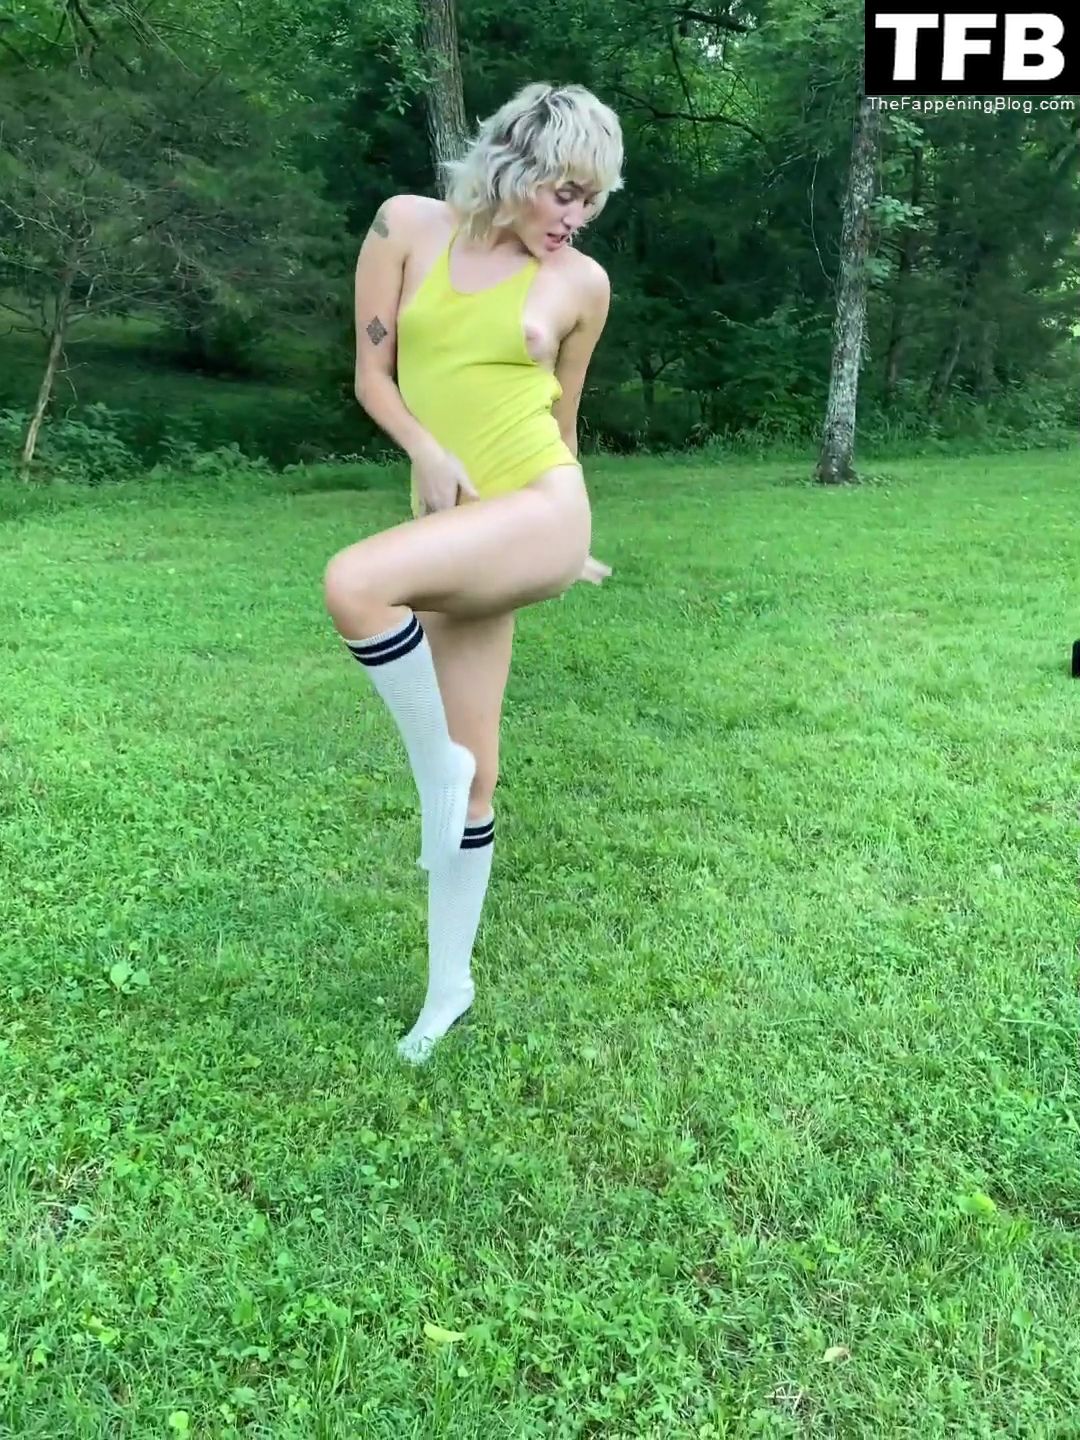 Miley Cyrus Flashes Her Nude Tit (5 Pics + Video)